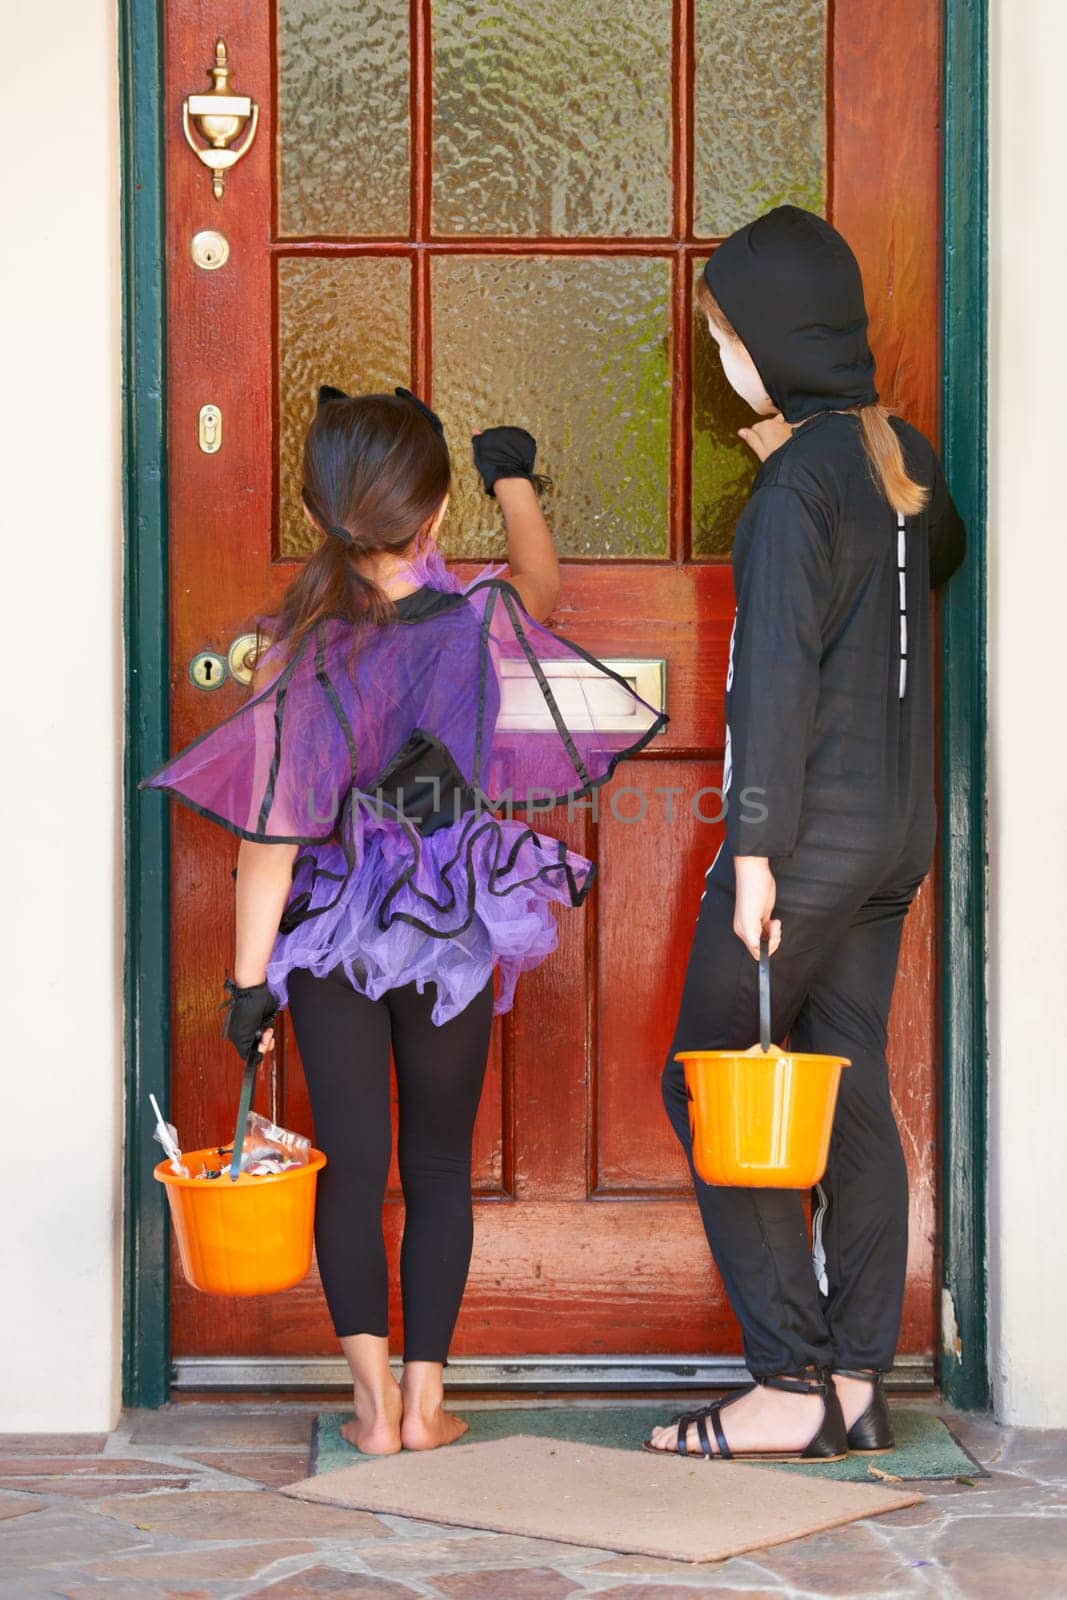 Tick or treating is so much fun. Rearview shot of some children knocking on a door during halloween. by YuriArcurs